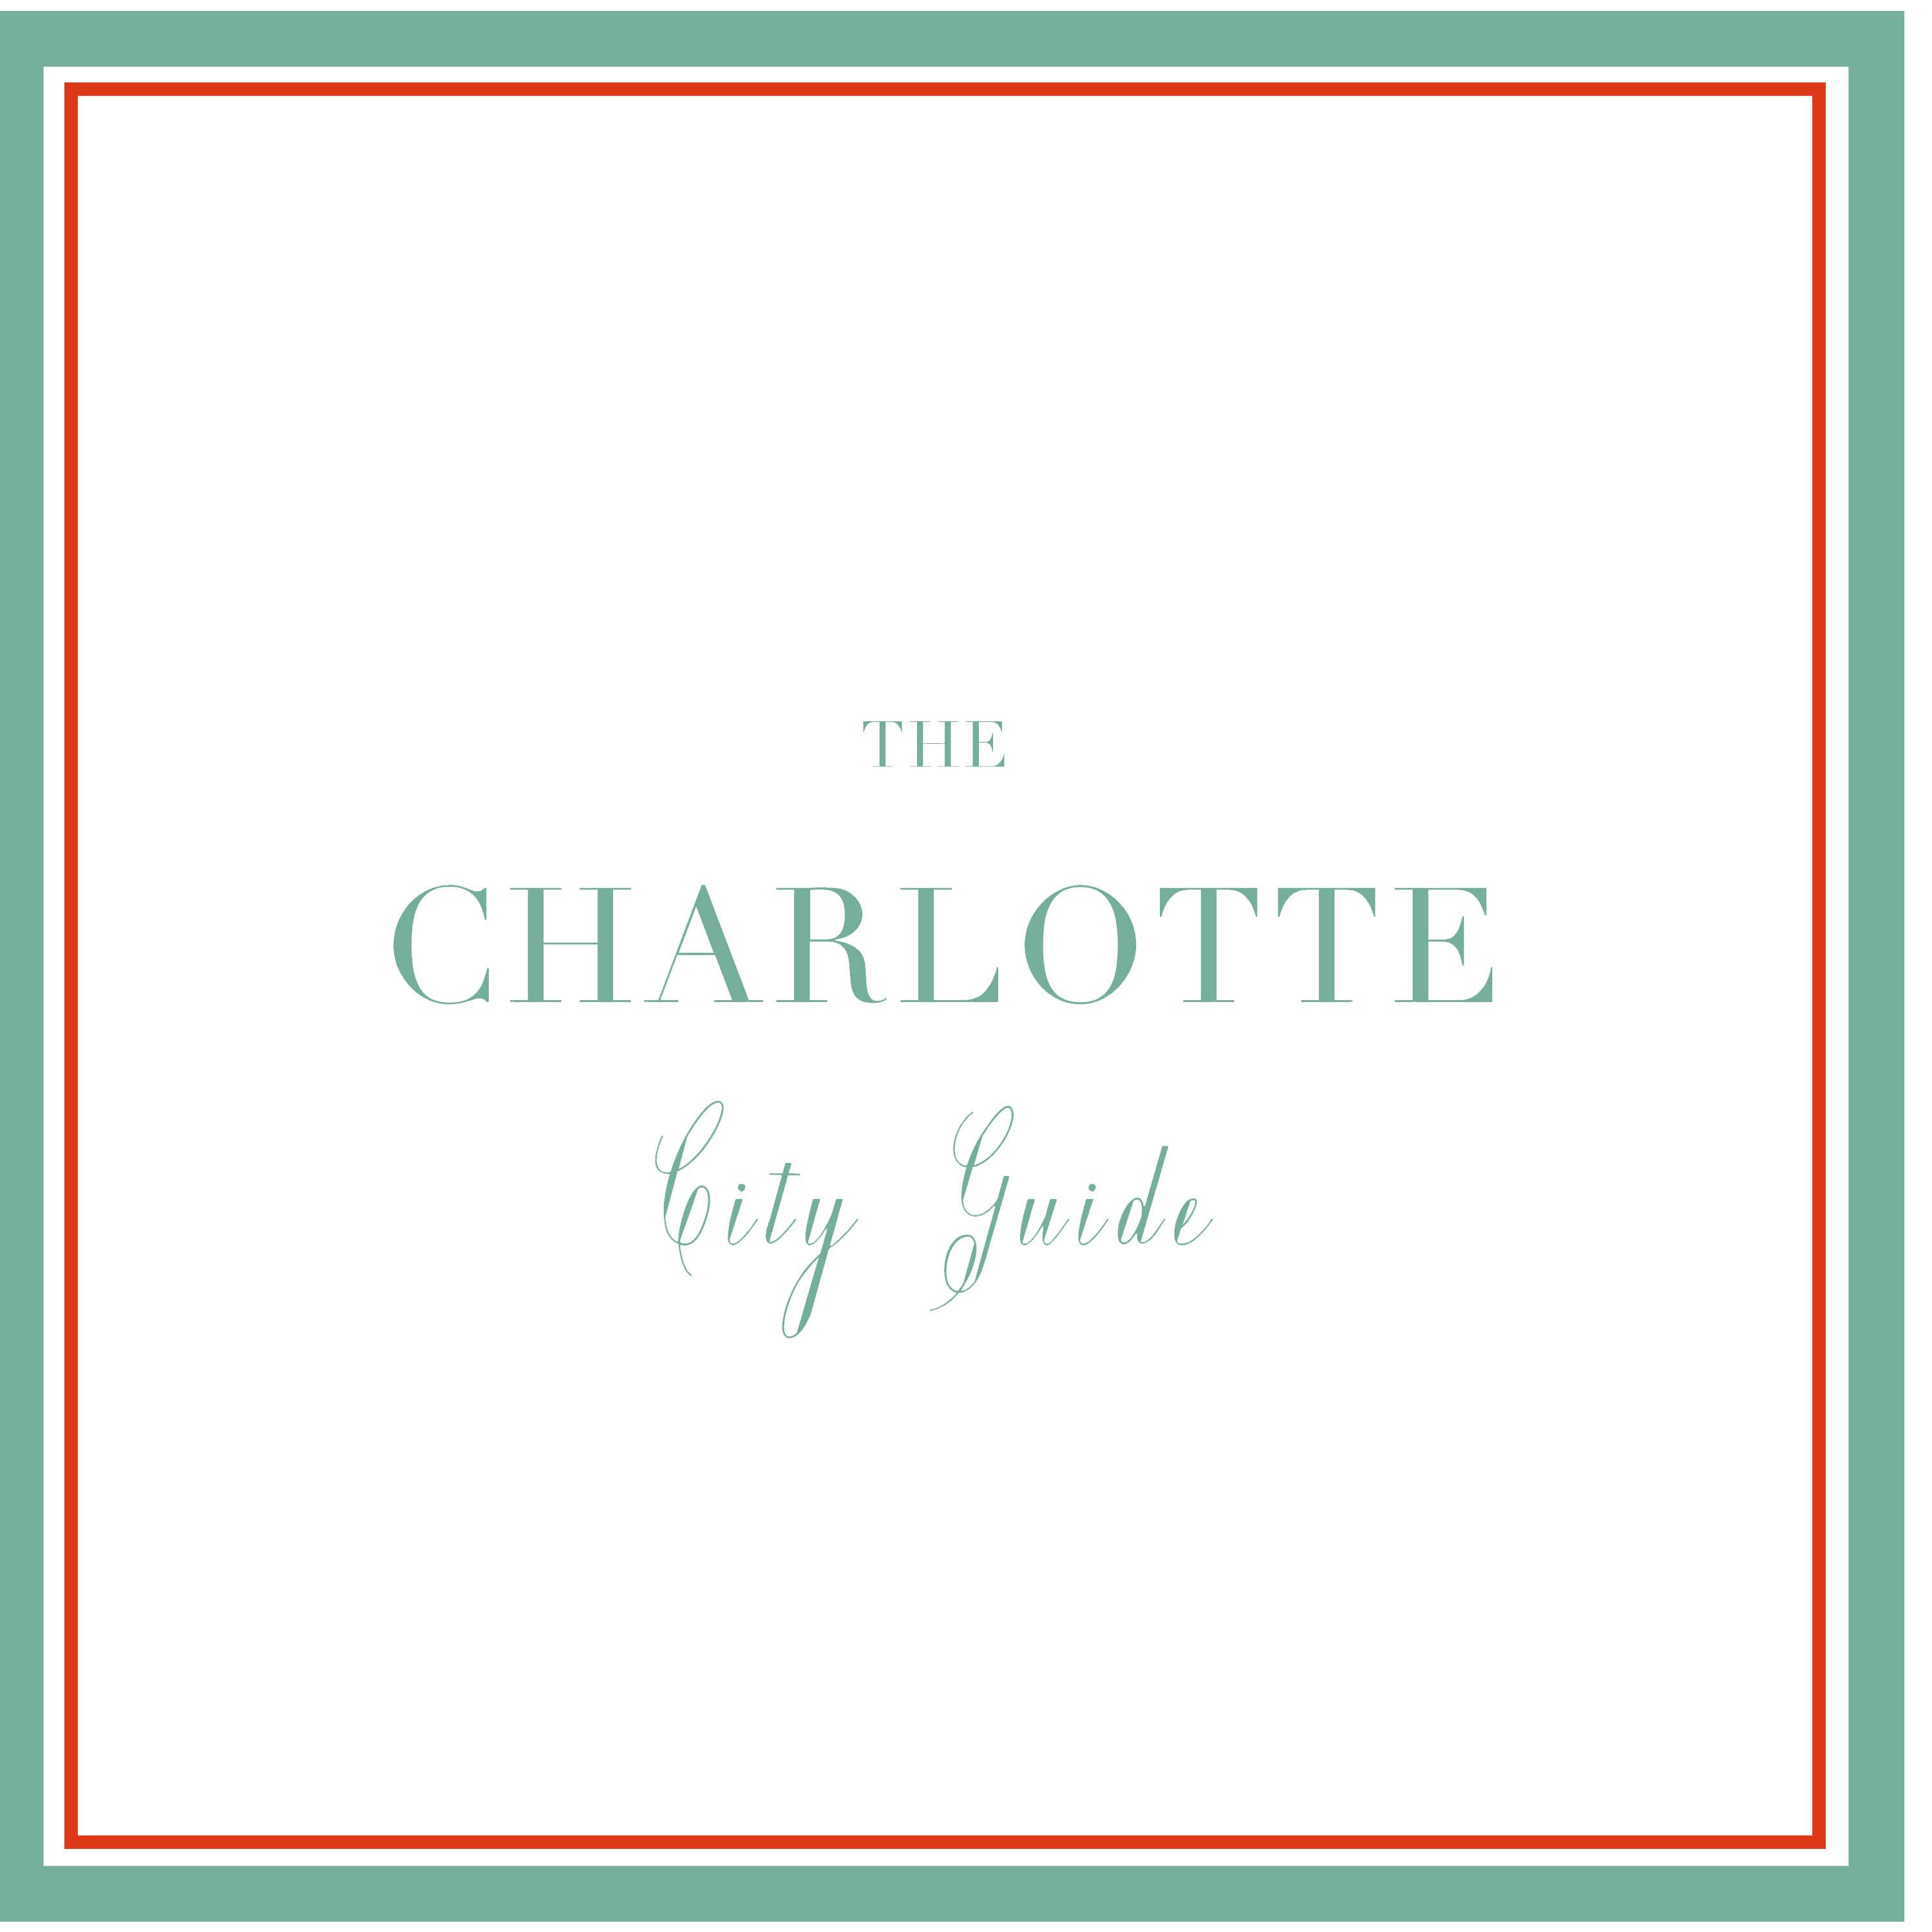 View The Charlotte City Guide